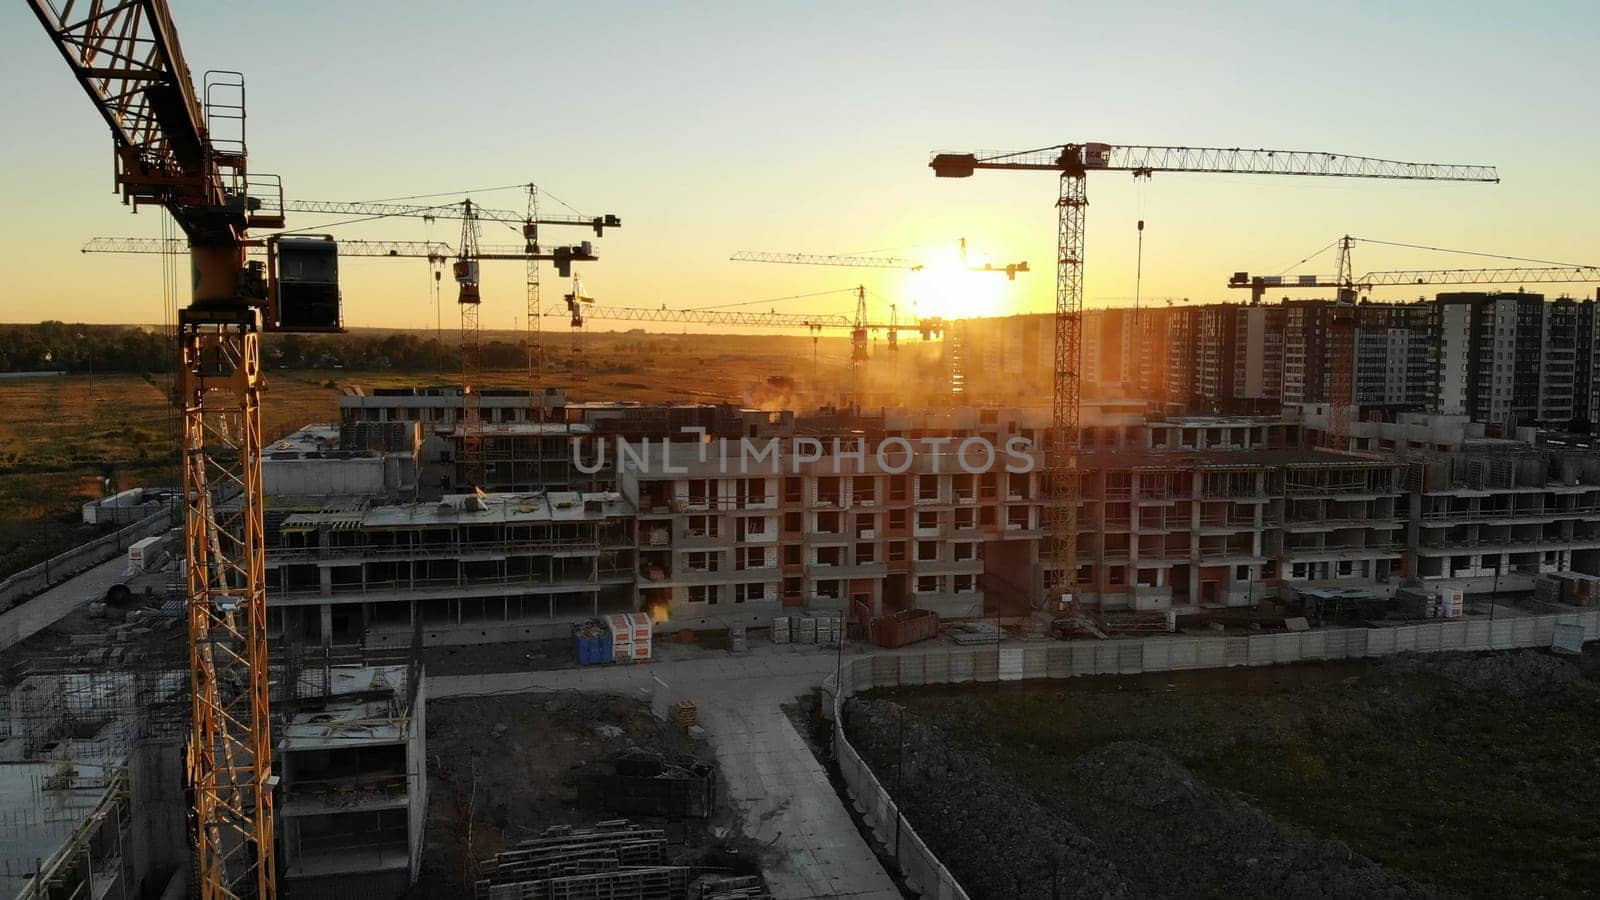 Silhouettes of construction cranes at sunset in Russia. by DovidPro